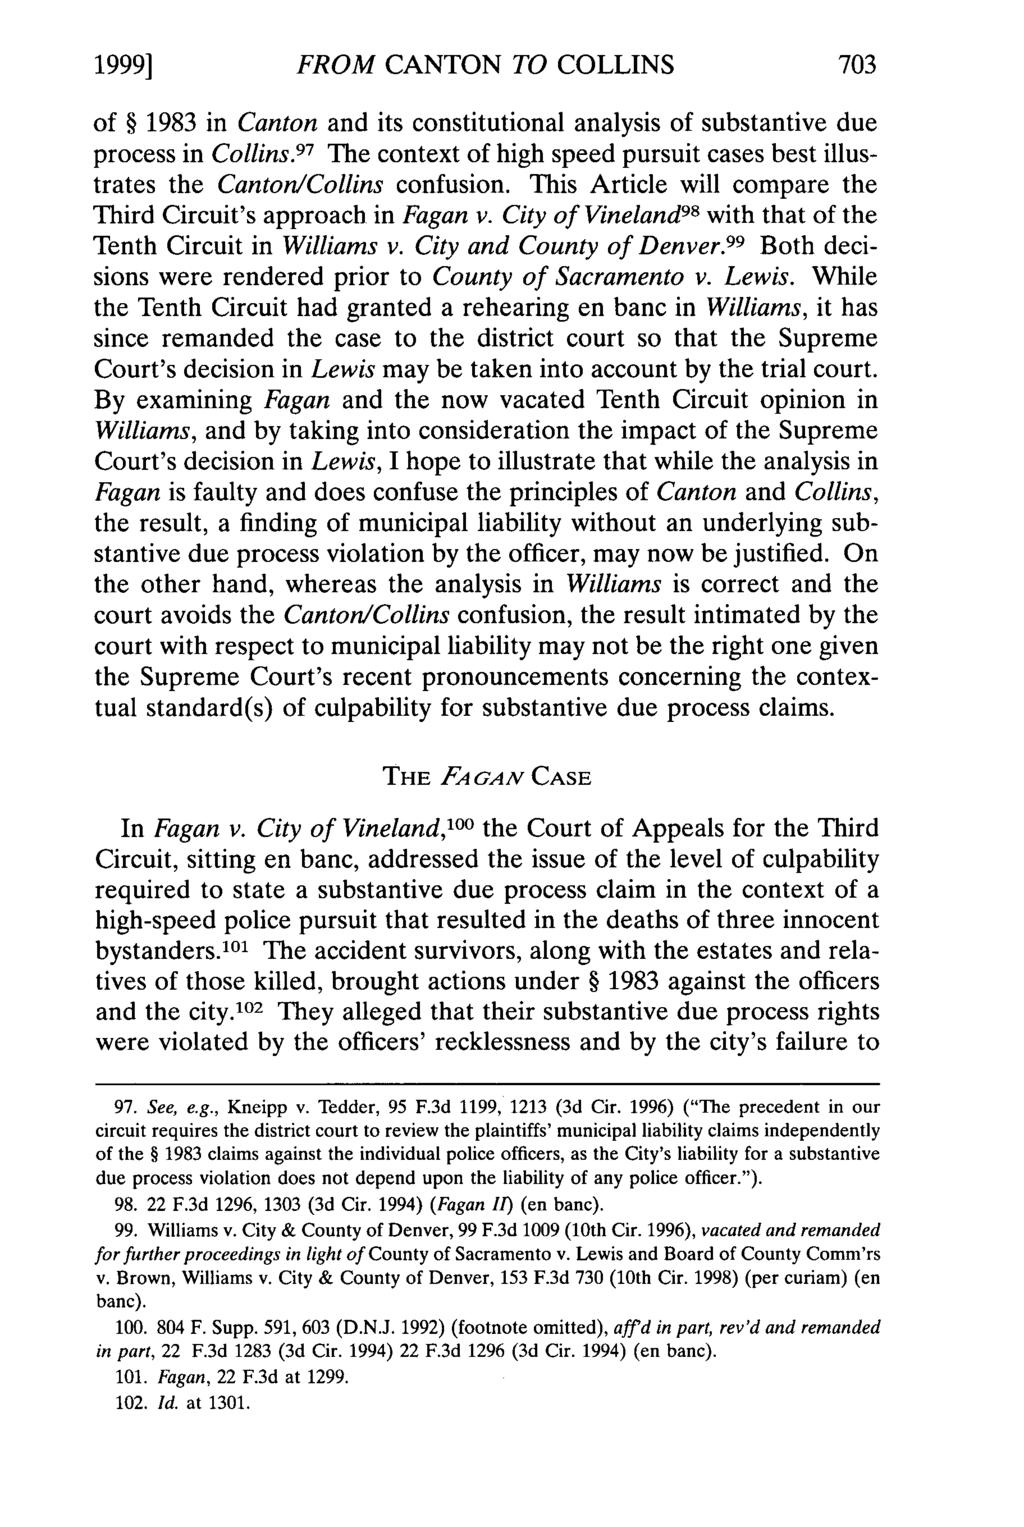 1999] FROM CANTON TO COLLINS of 1983 in Canton and its constitutional analysis of substantive due process in Collins.